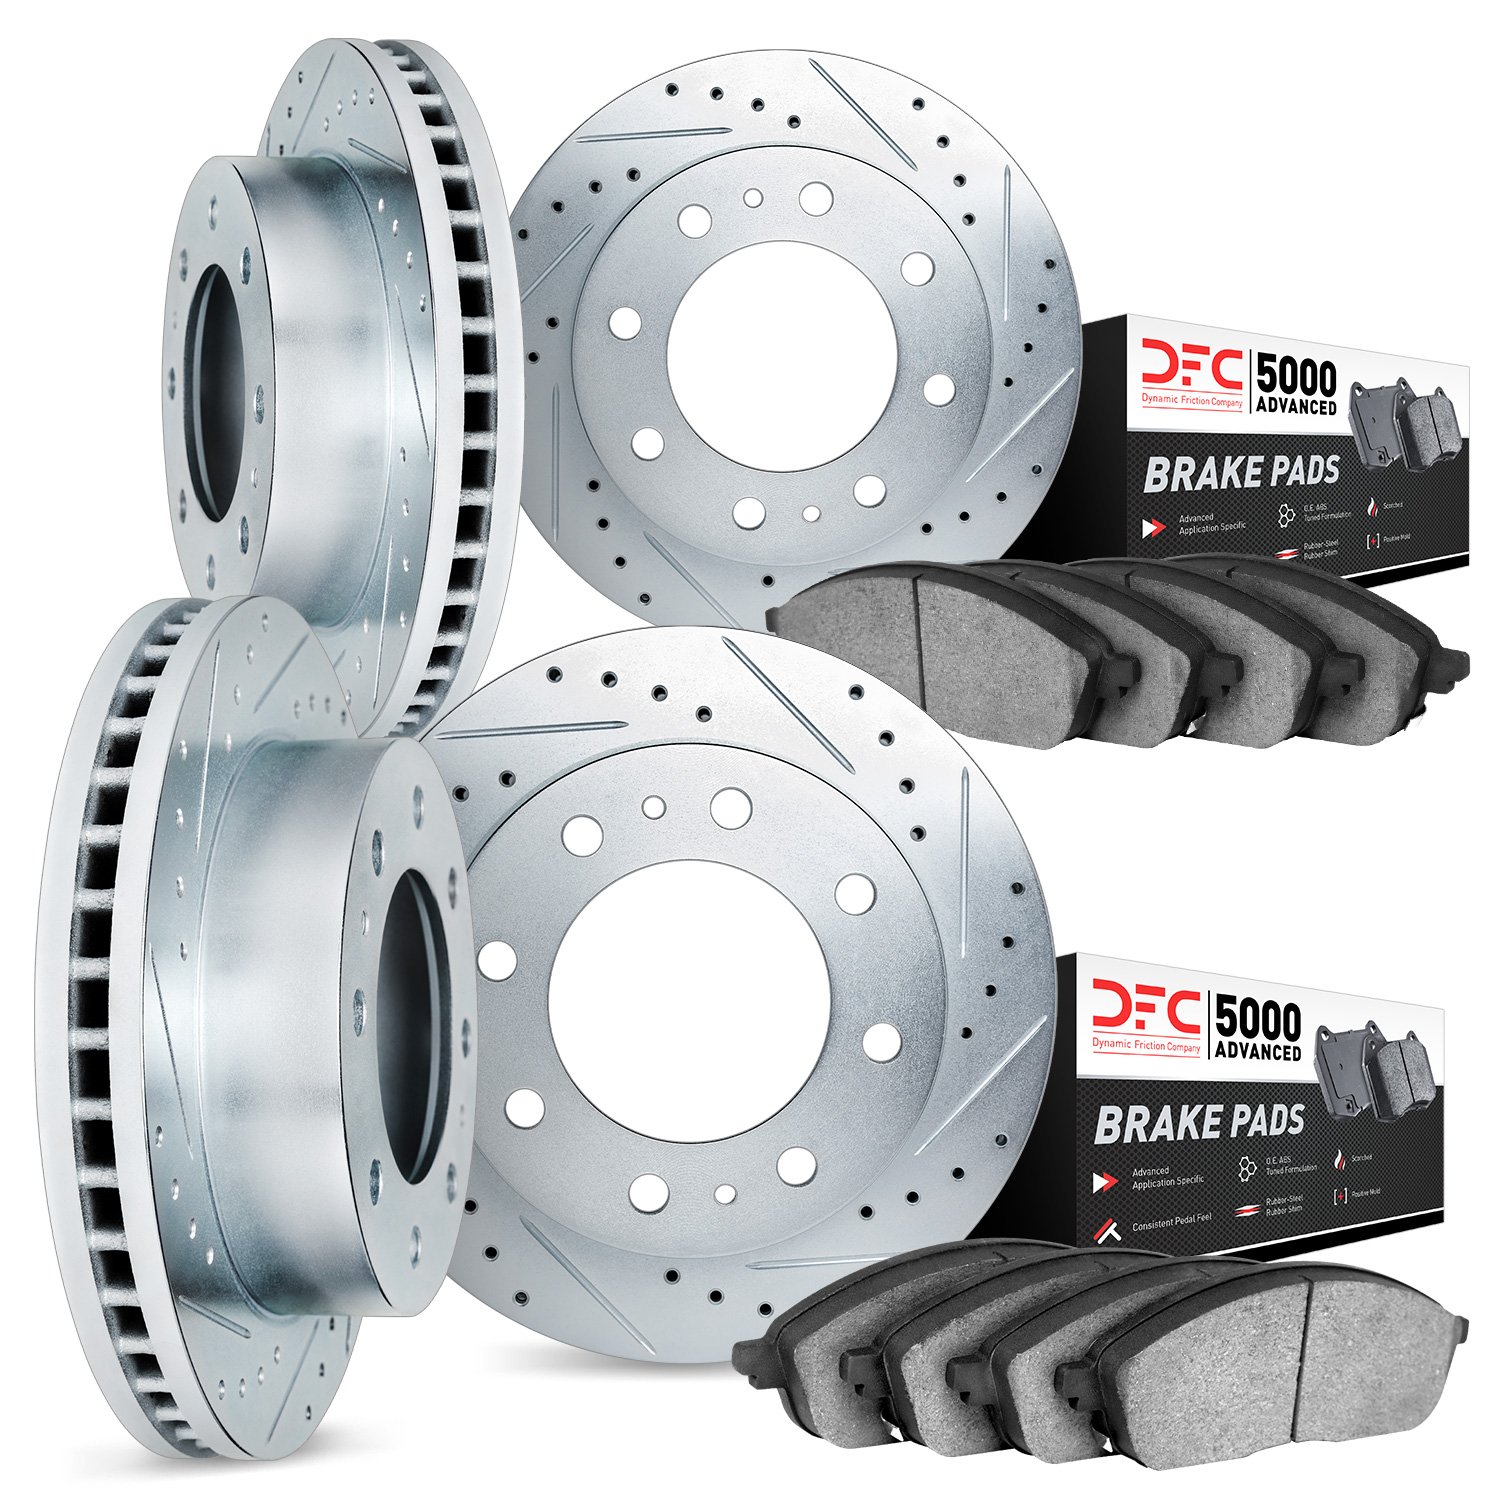 7504-48007 Drilled/Slotted Brake Rotors w/5000 Advanced Brake Pads Kit [Silver], 1999-2009 GM, Position: Front and Rear